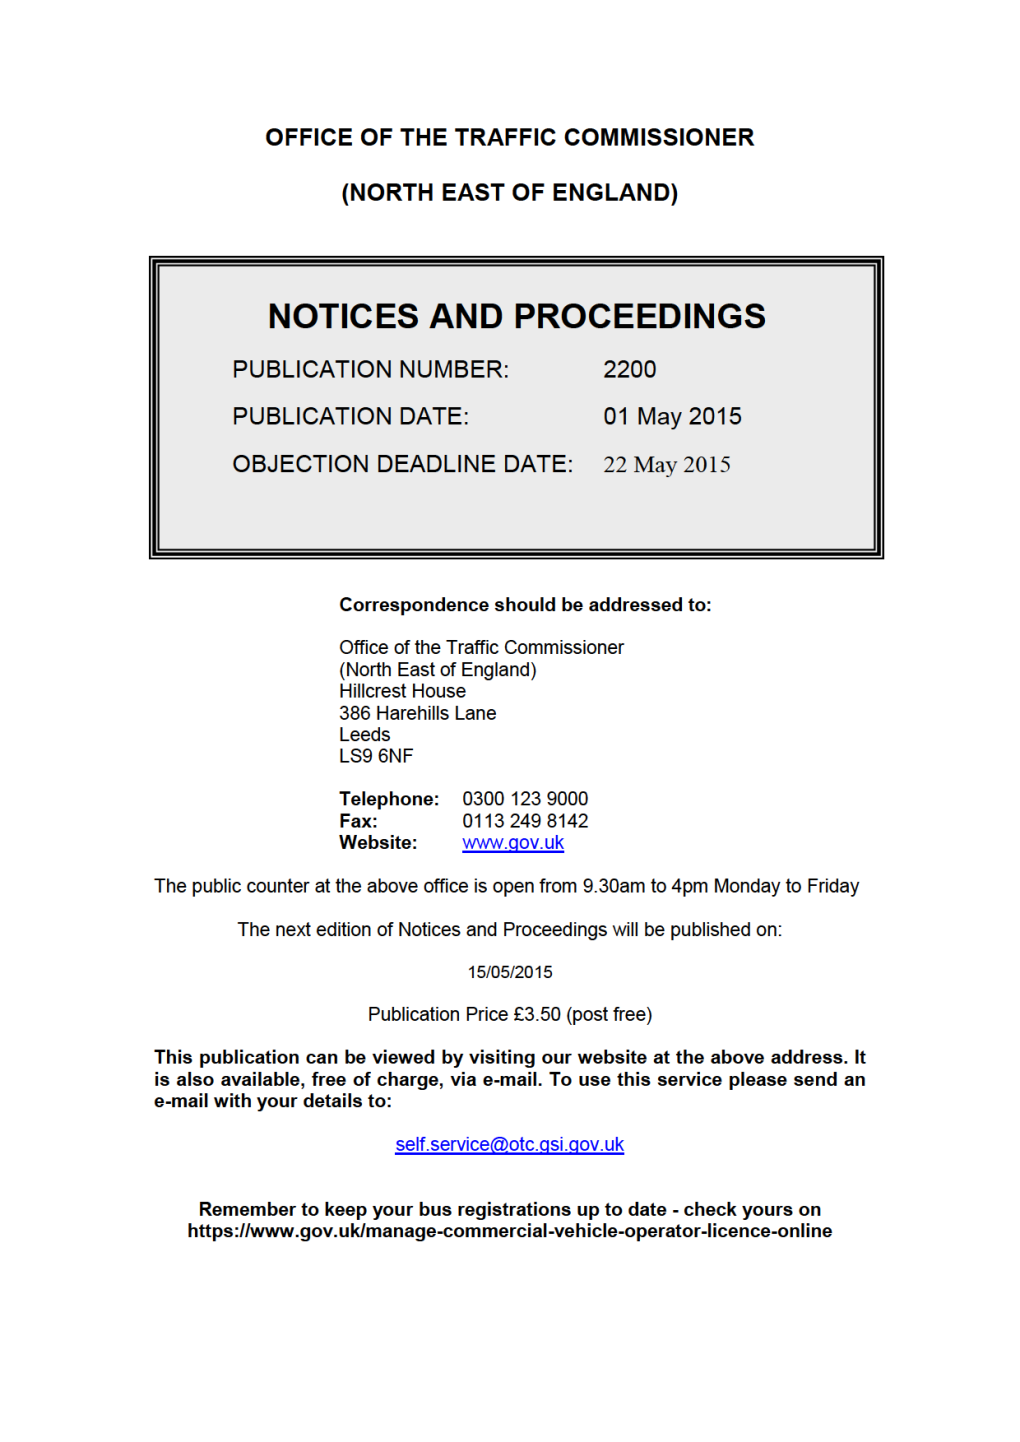 NOTICES and PROCEEDINGS 1 May 2015